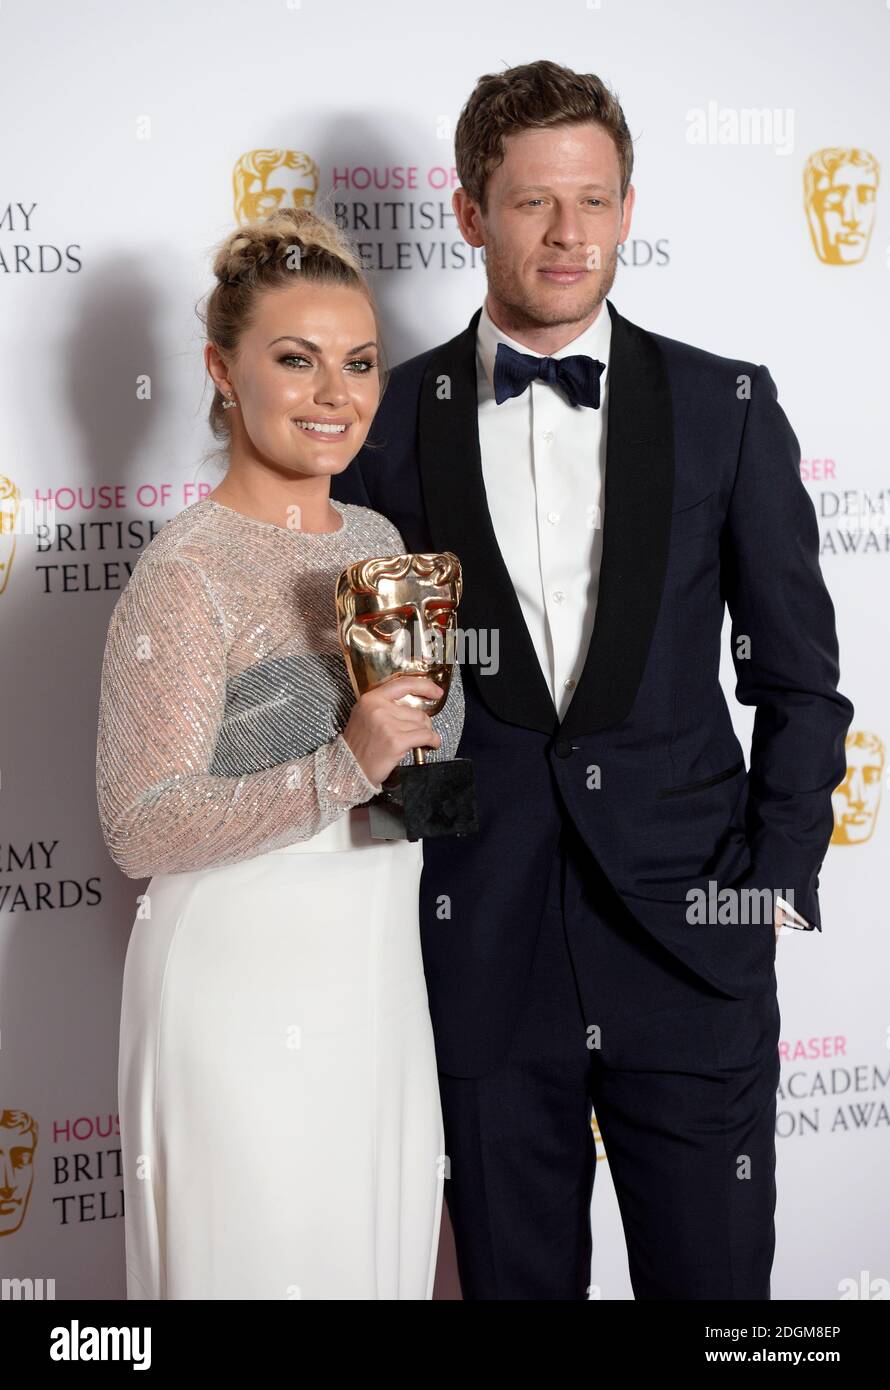 Chanel Cresswell with the Best Supporting Actress award for This Is England  '90 alongside James Norton in the press room the House of Fraser BAFTA TV  Awards 2016 at the Royal Festival